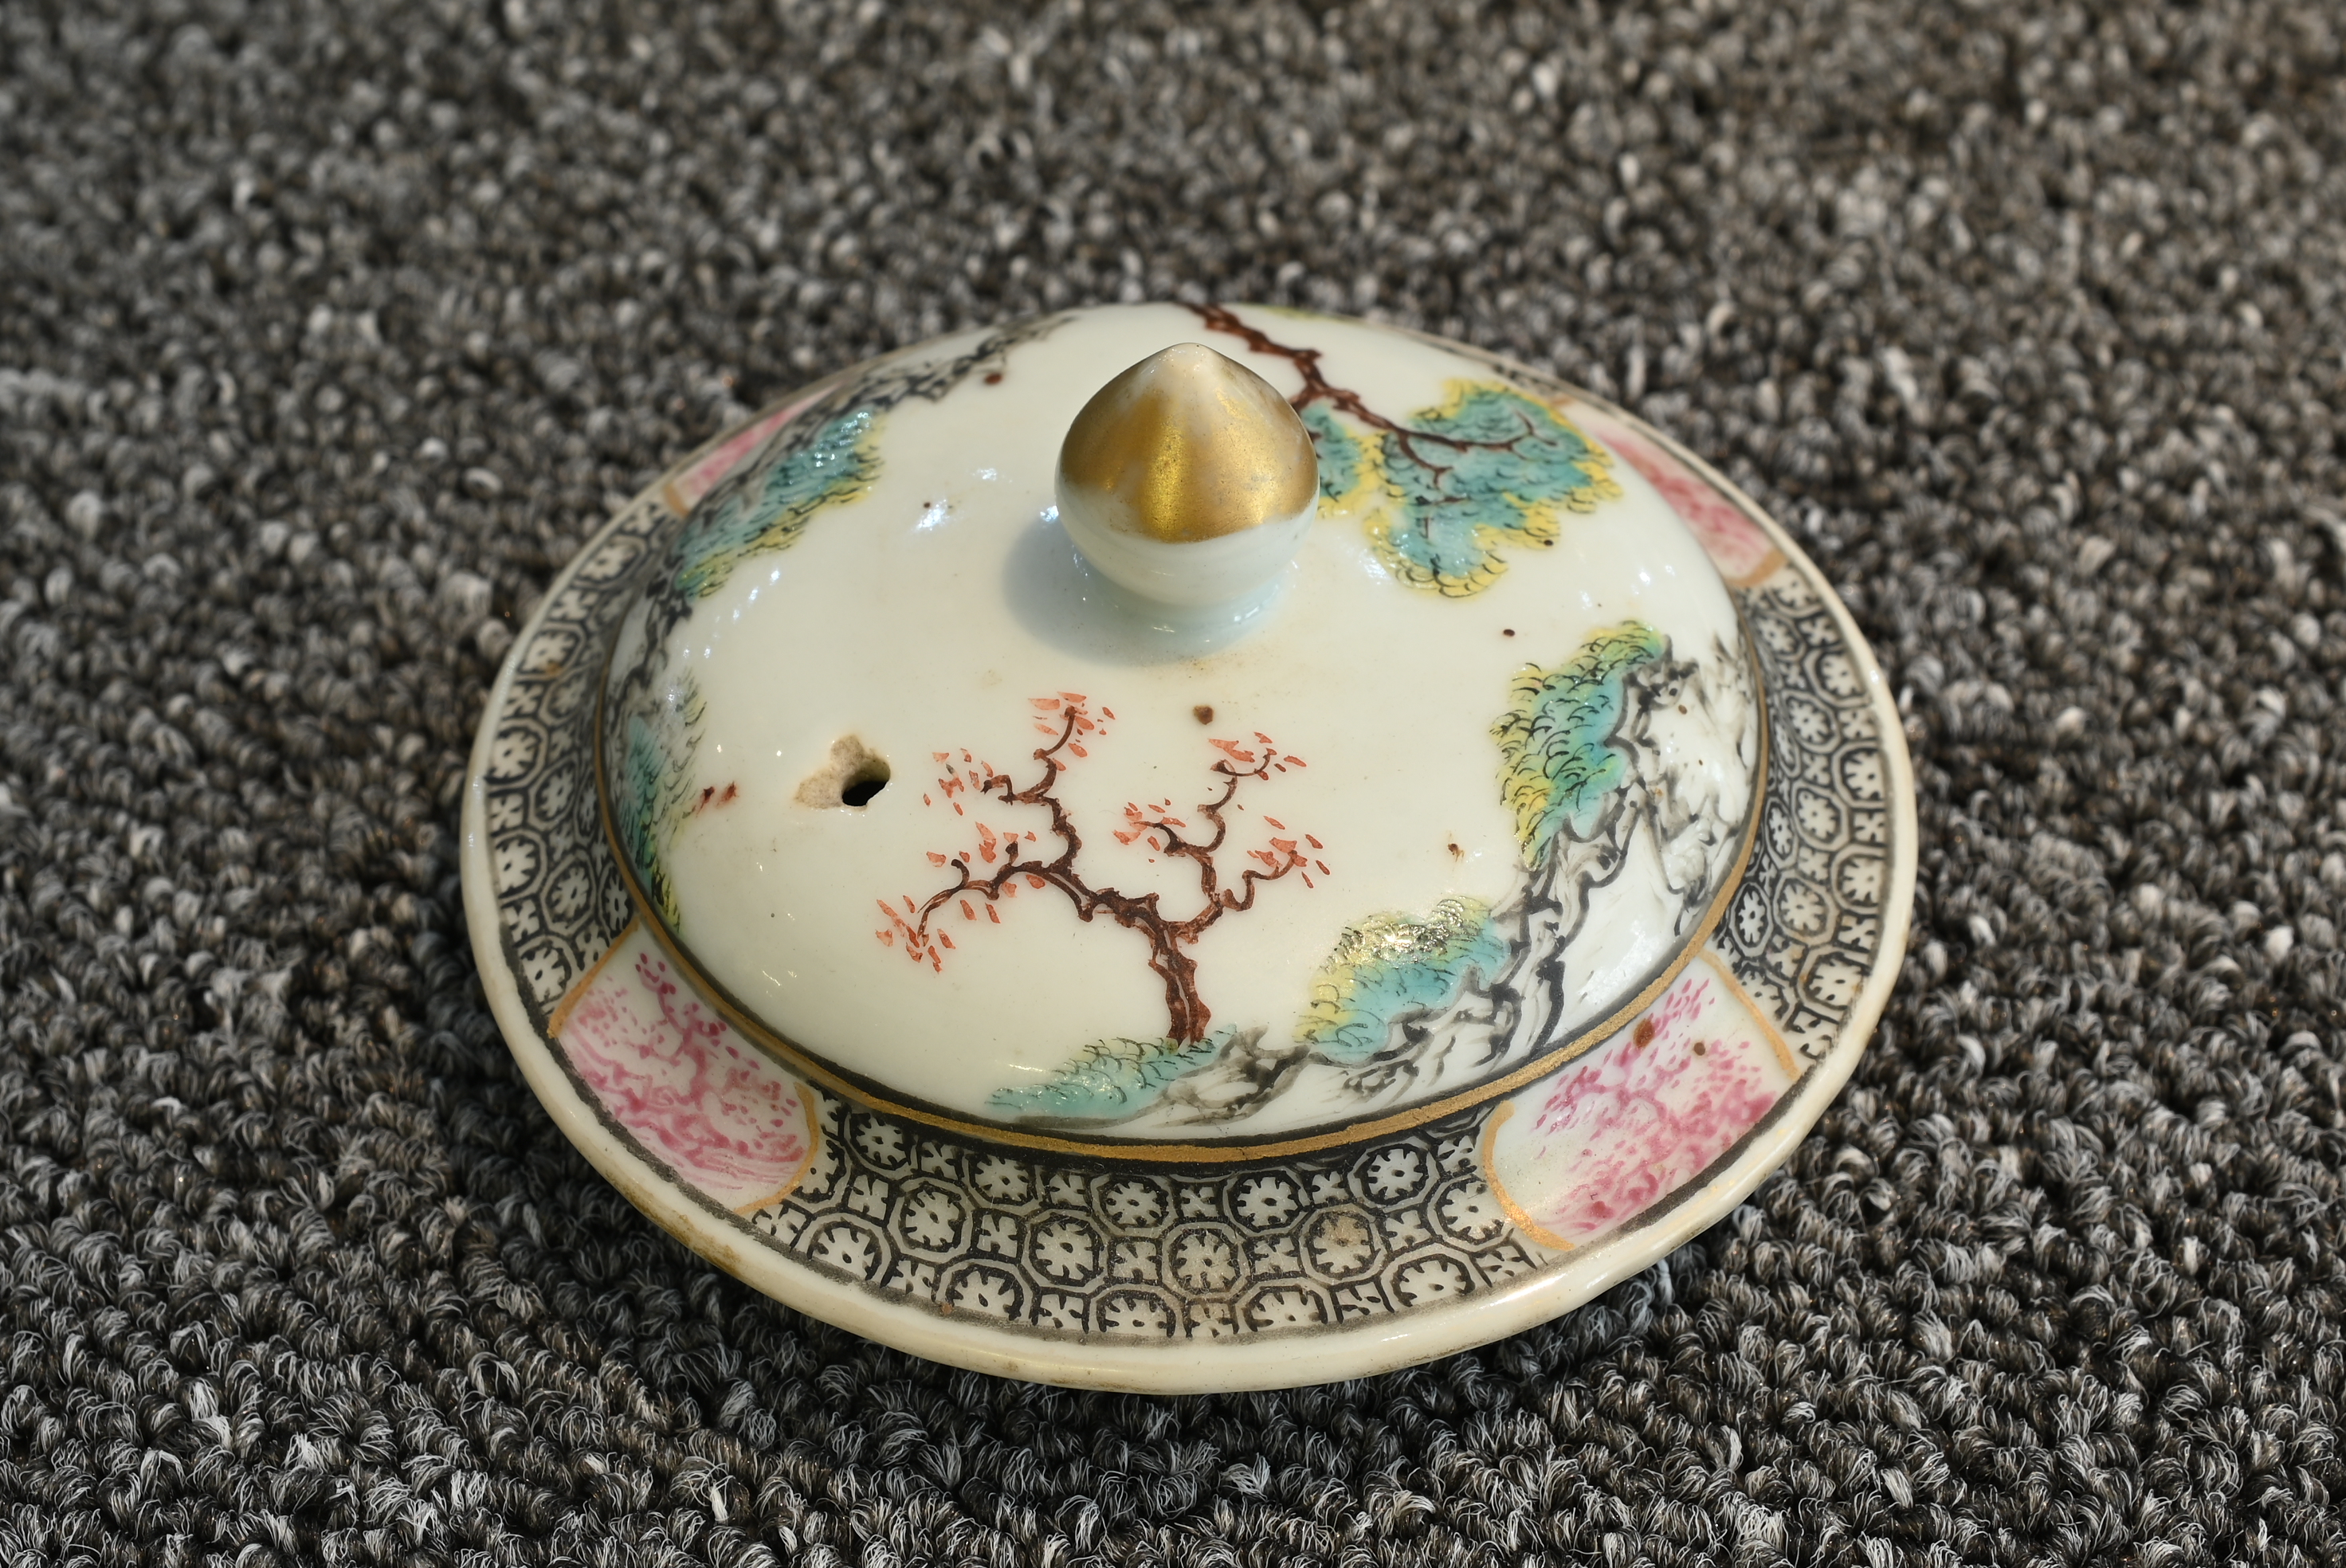 A FINE CHINESE FAMILLE ROSE PORCELAIN TEAPOT, 18TH CENTURY - Image 17 of 21